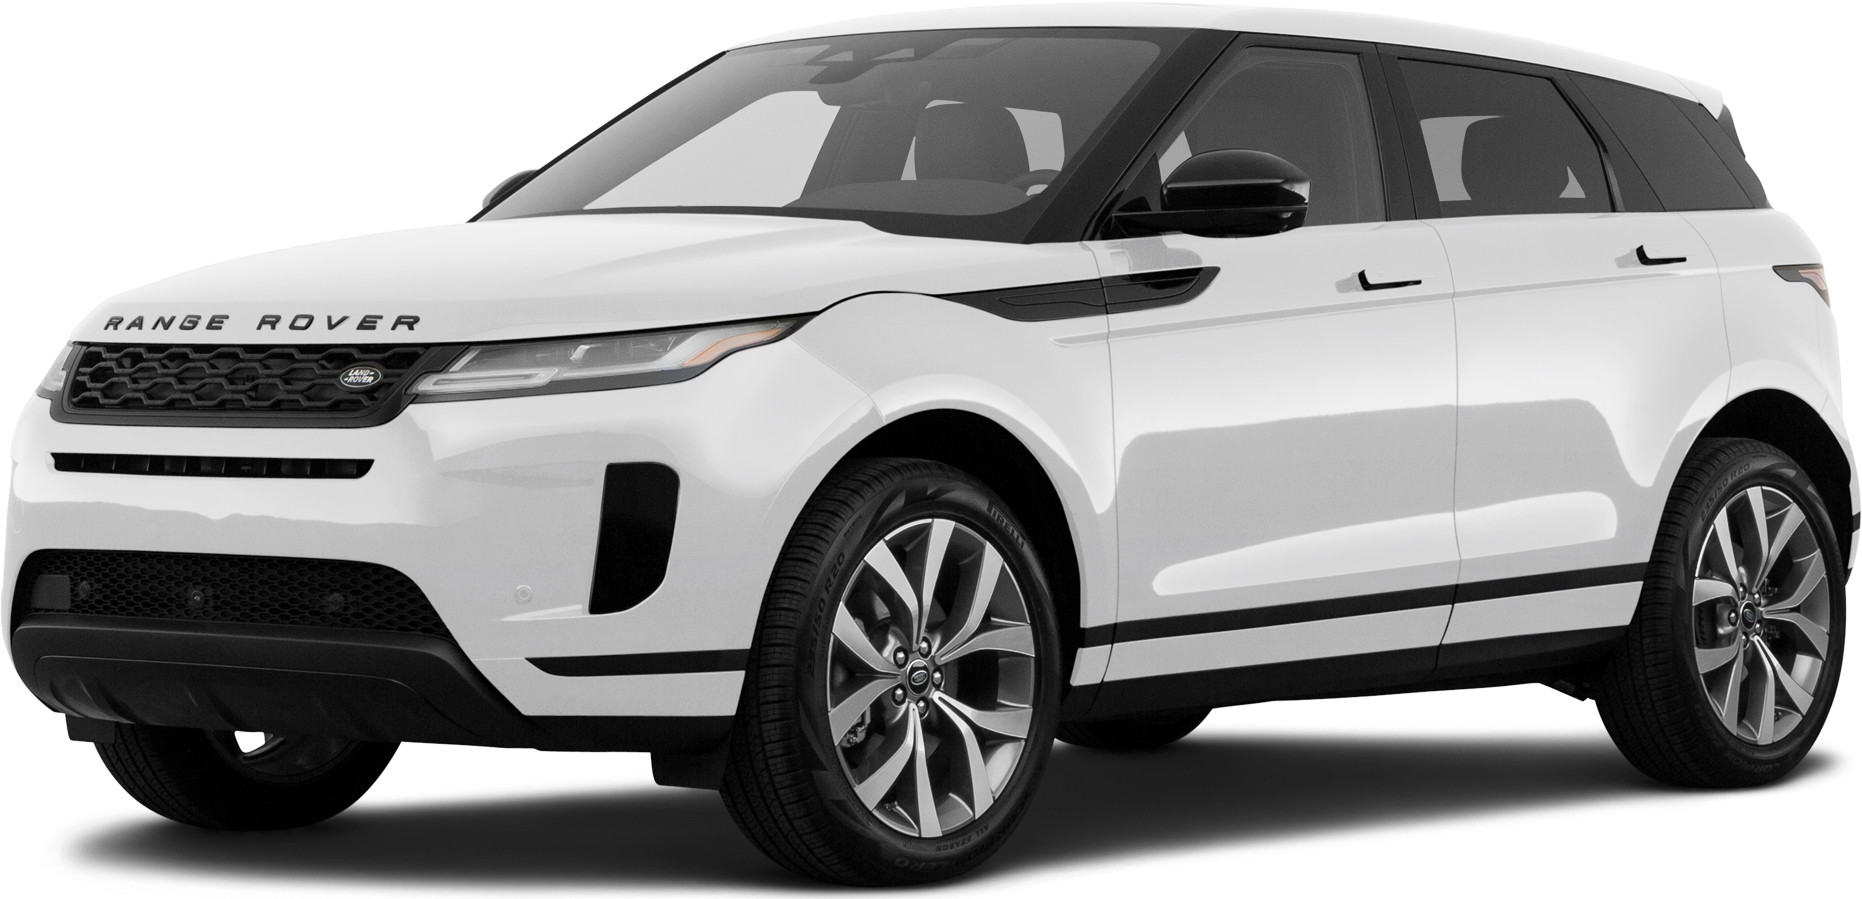 2023 Land Rover Range Rover Evoque Specs and Features